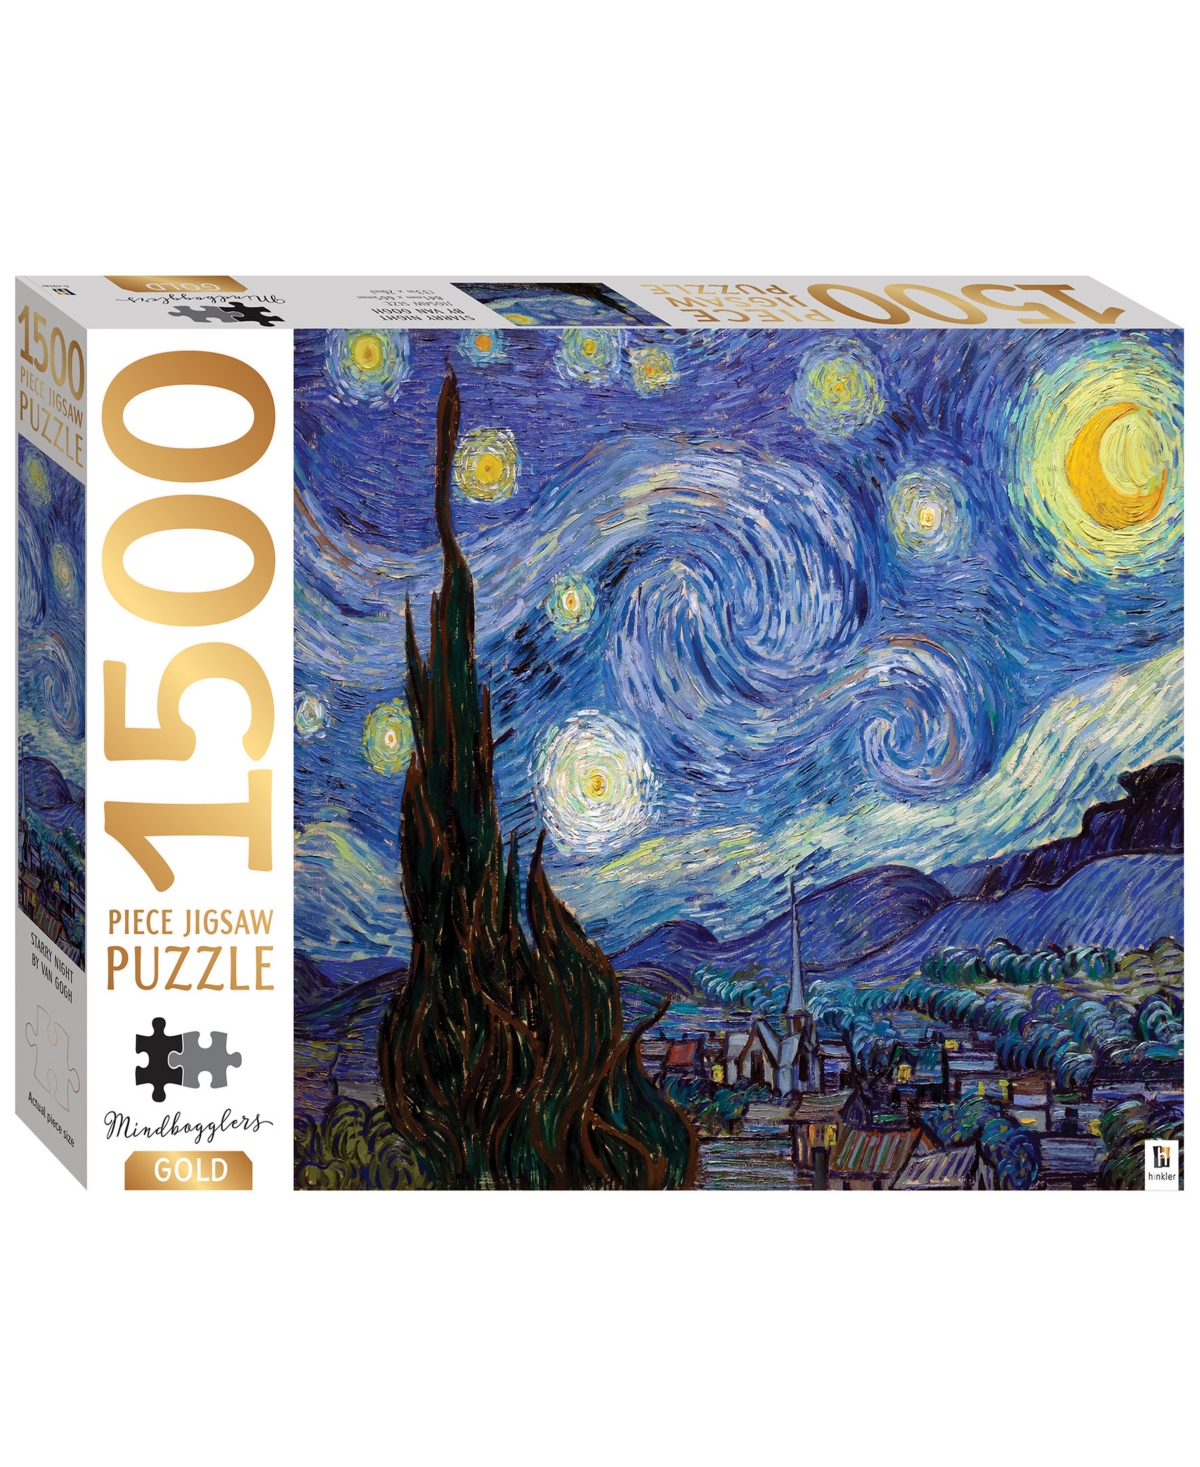 Mindbogglers Kids' Gold-tone Foil 1500-piece Jigsaw Puzzle Starry Night By Van Gogh Jigsaws For Adults Deluxe Jigsaw Pu In Multi